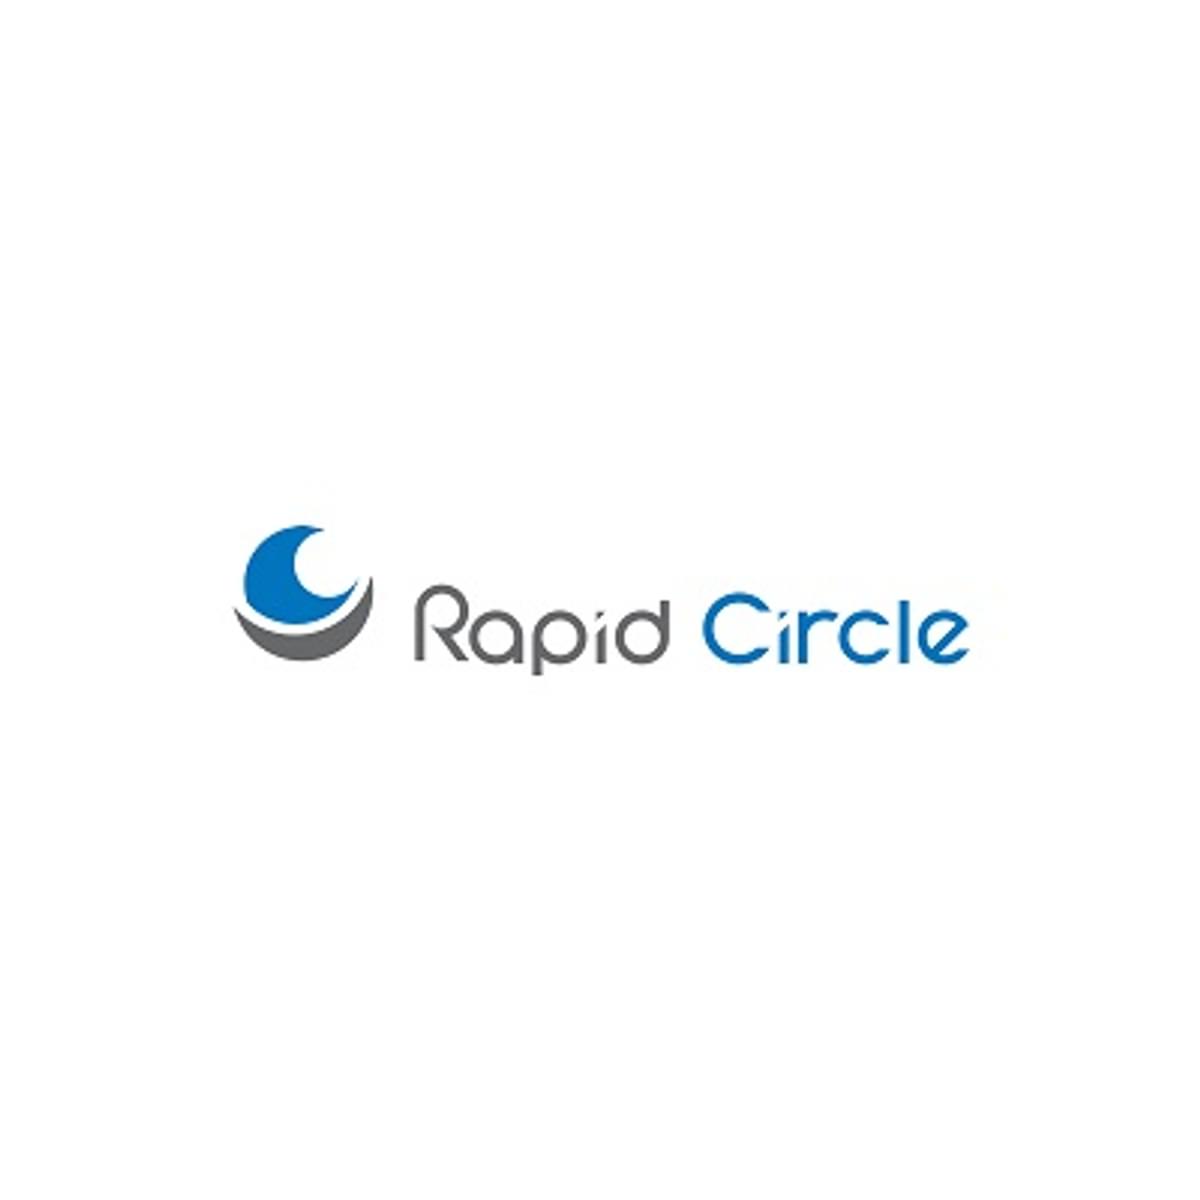 Rapid Circle finalist in drie categorieën Microsoft Partner of the Year Awards image